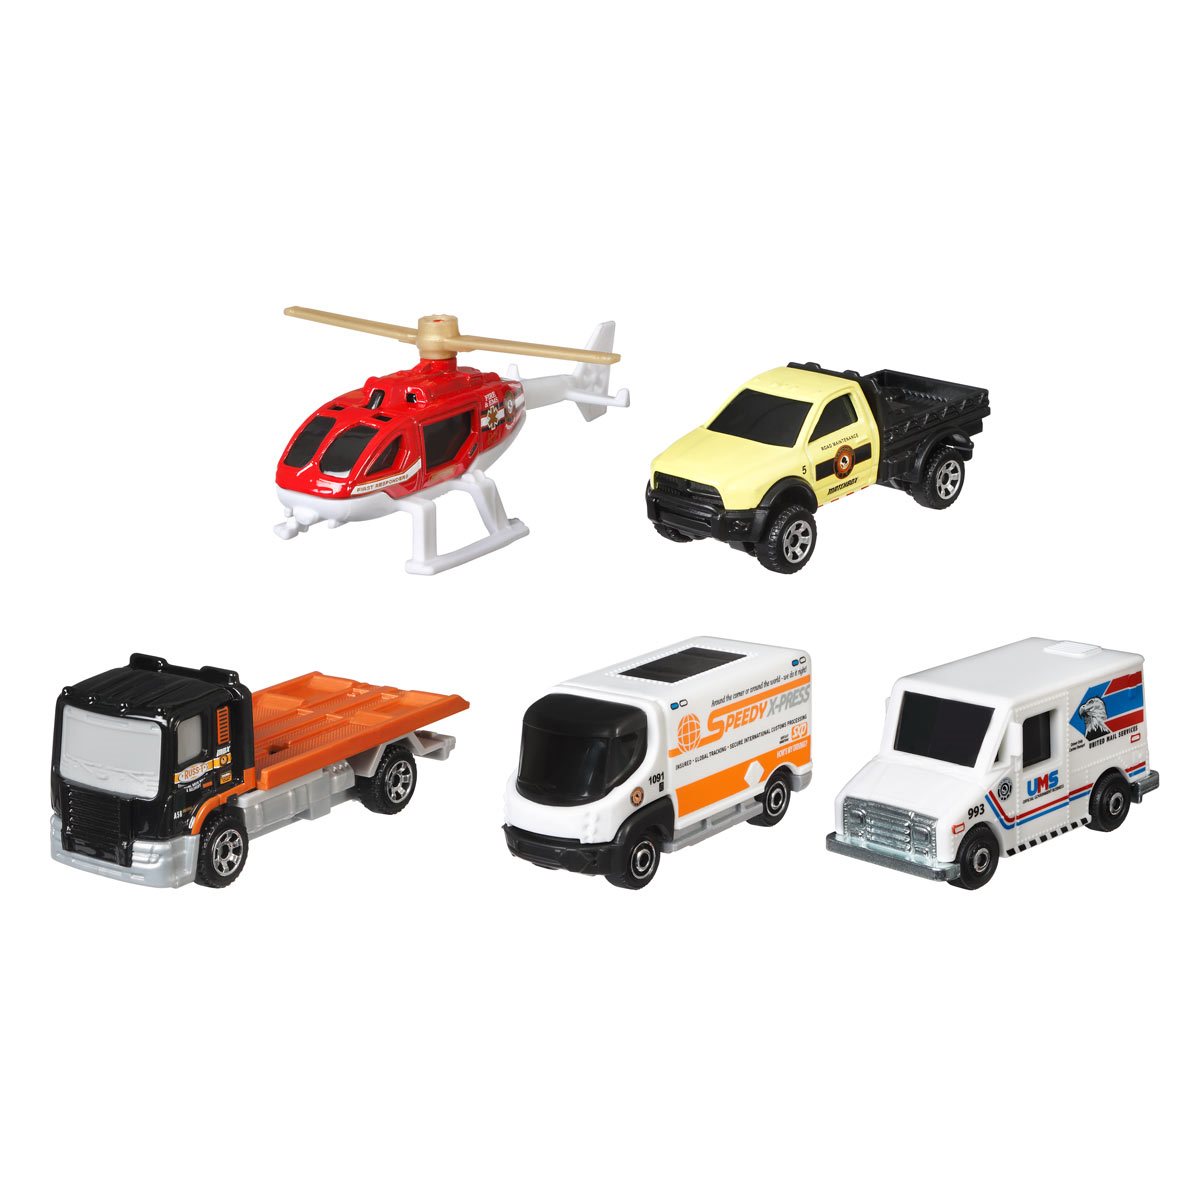 MATCHBOX. Set of collectible miniature cars including Ch…